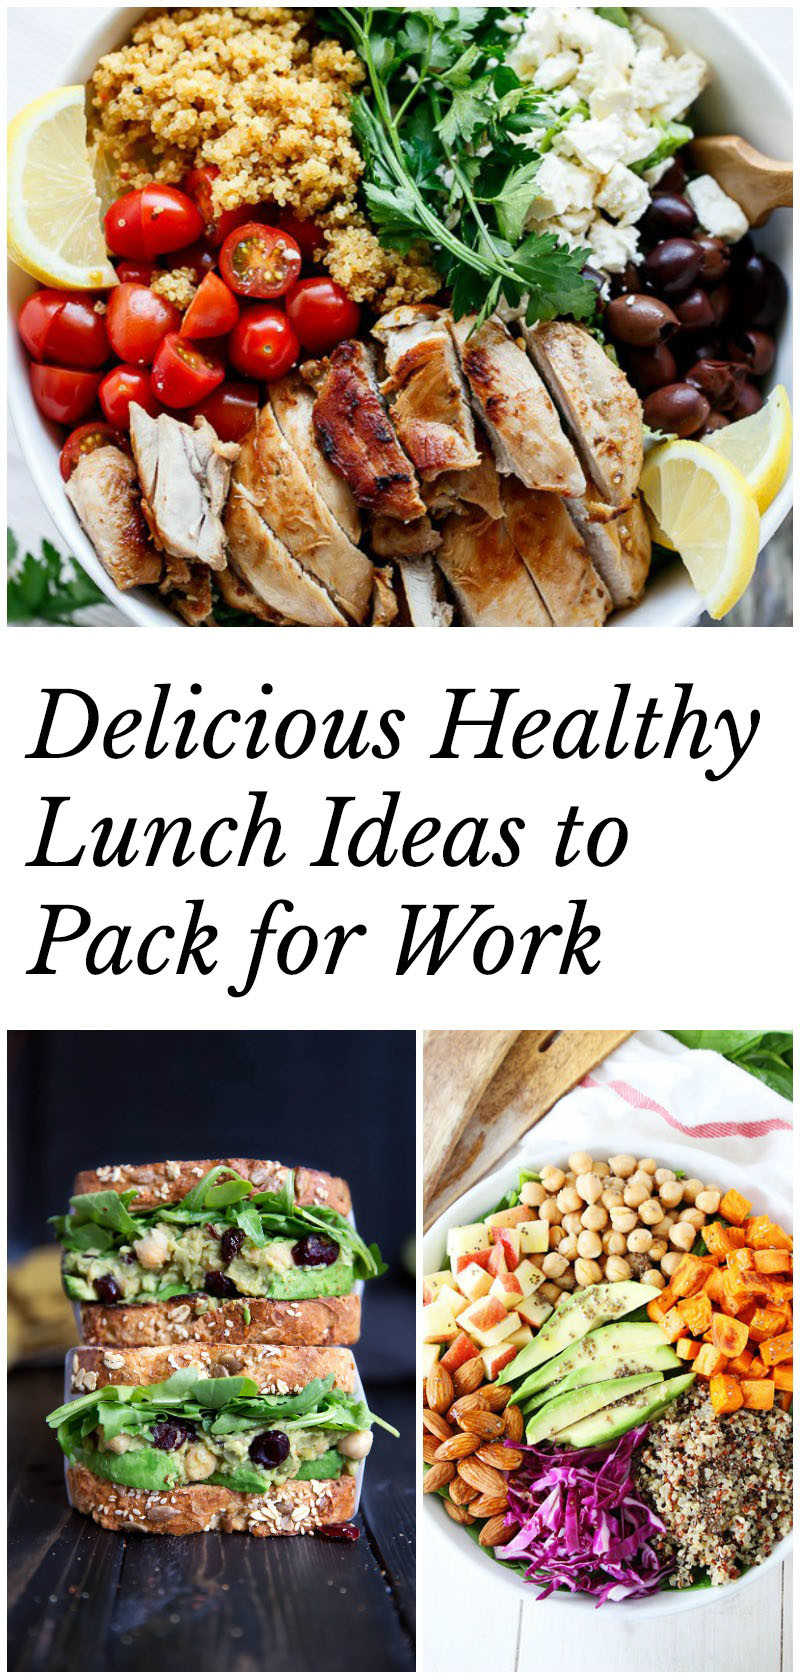 Healthy Lunches To Pack For Work
 Healthy Lunch Ideas to Pack for Work 40 recipes